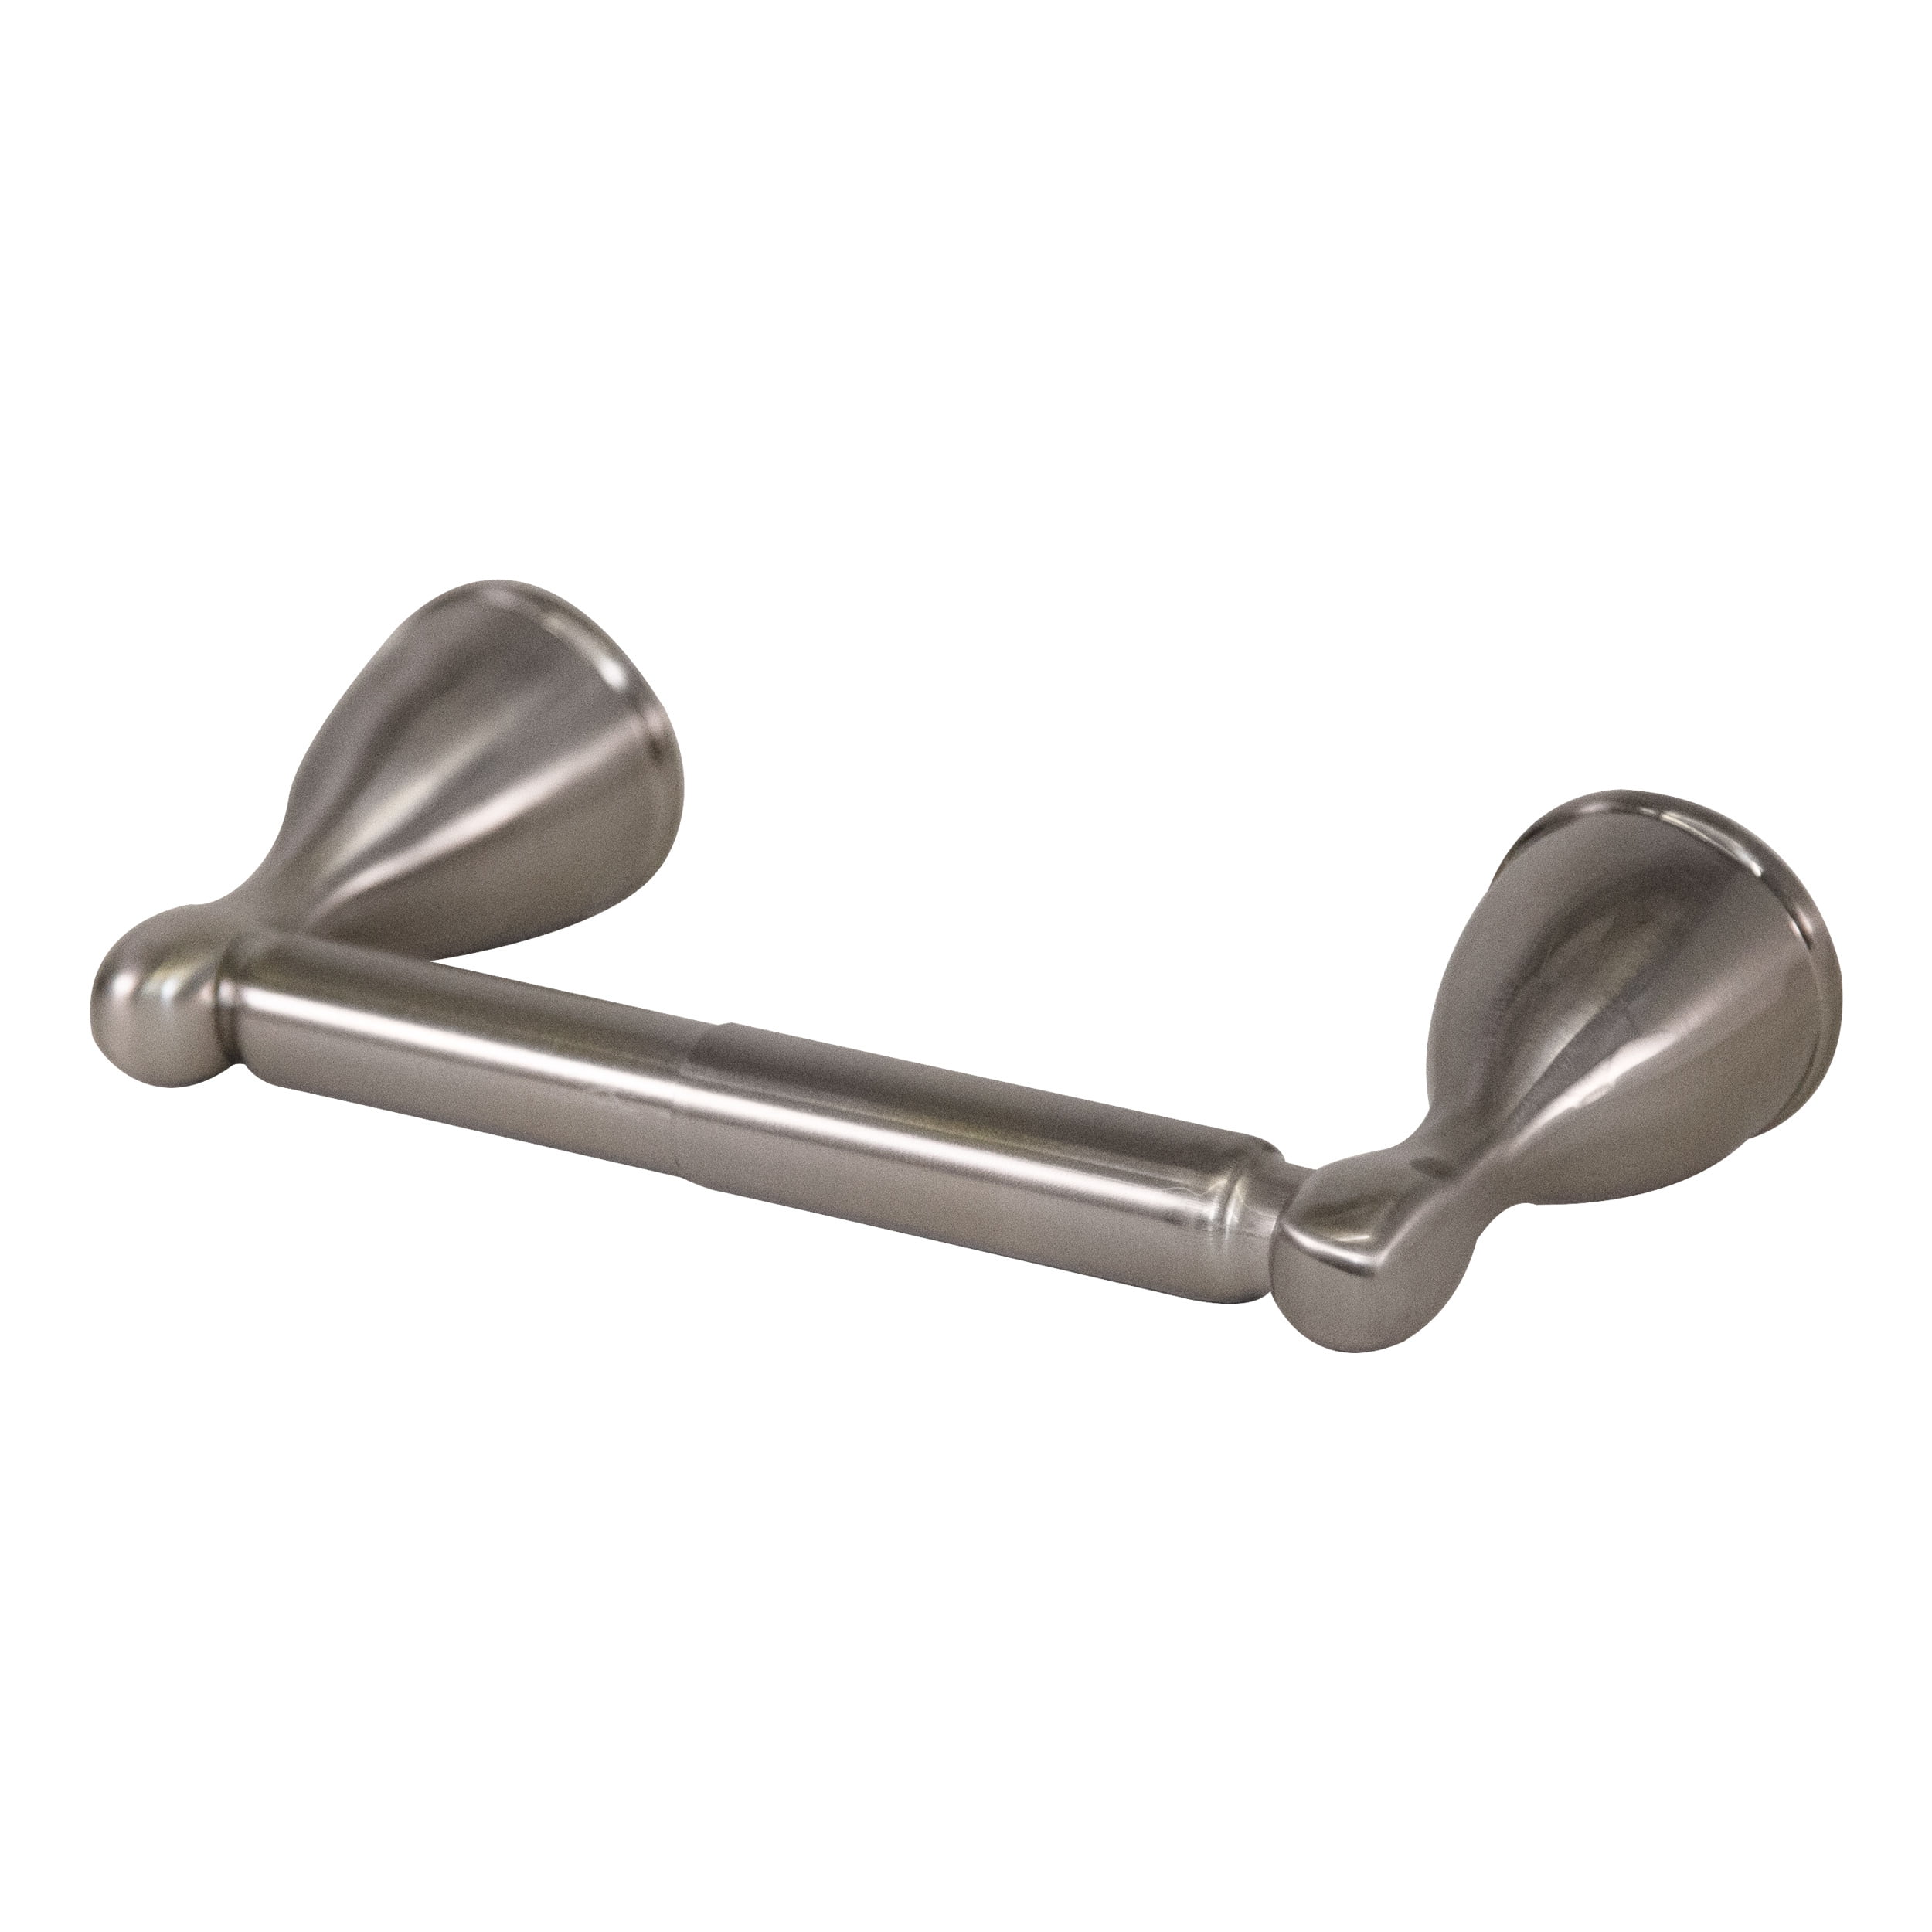 Better Home Products #6807SN Euro Toilet Paper Holder Satin Nickel RV Home Boat 